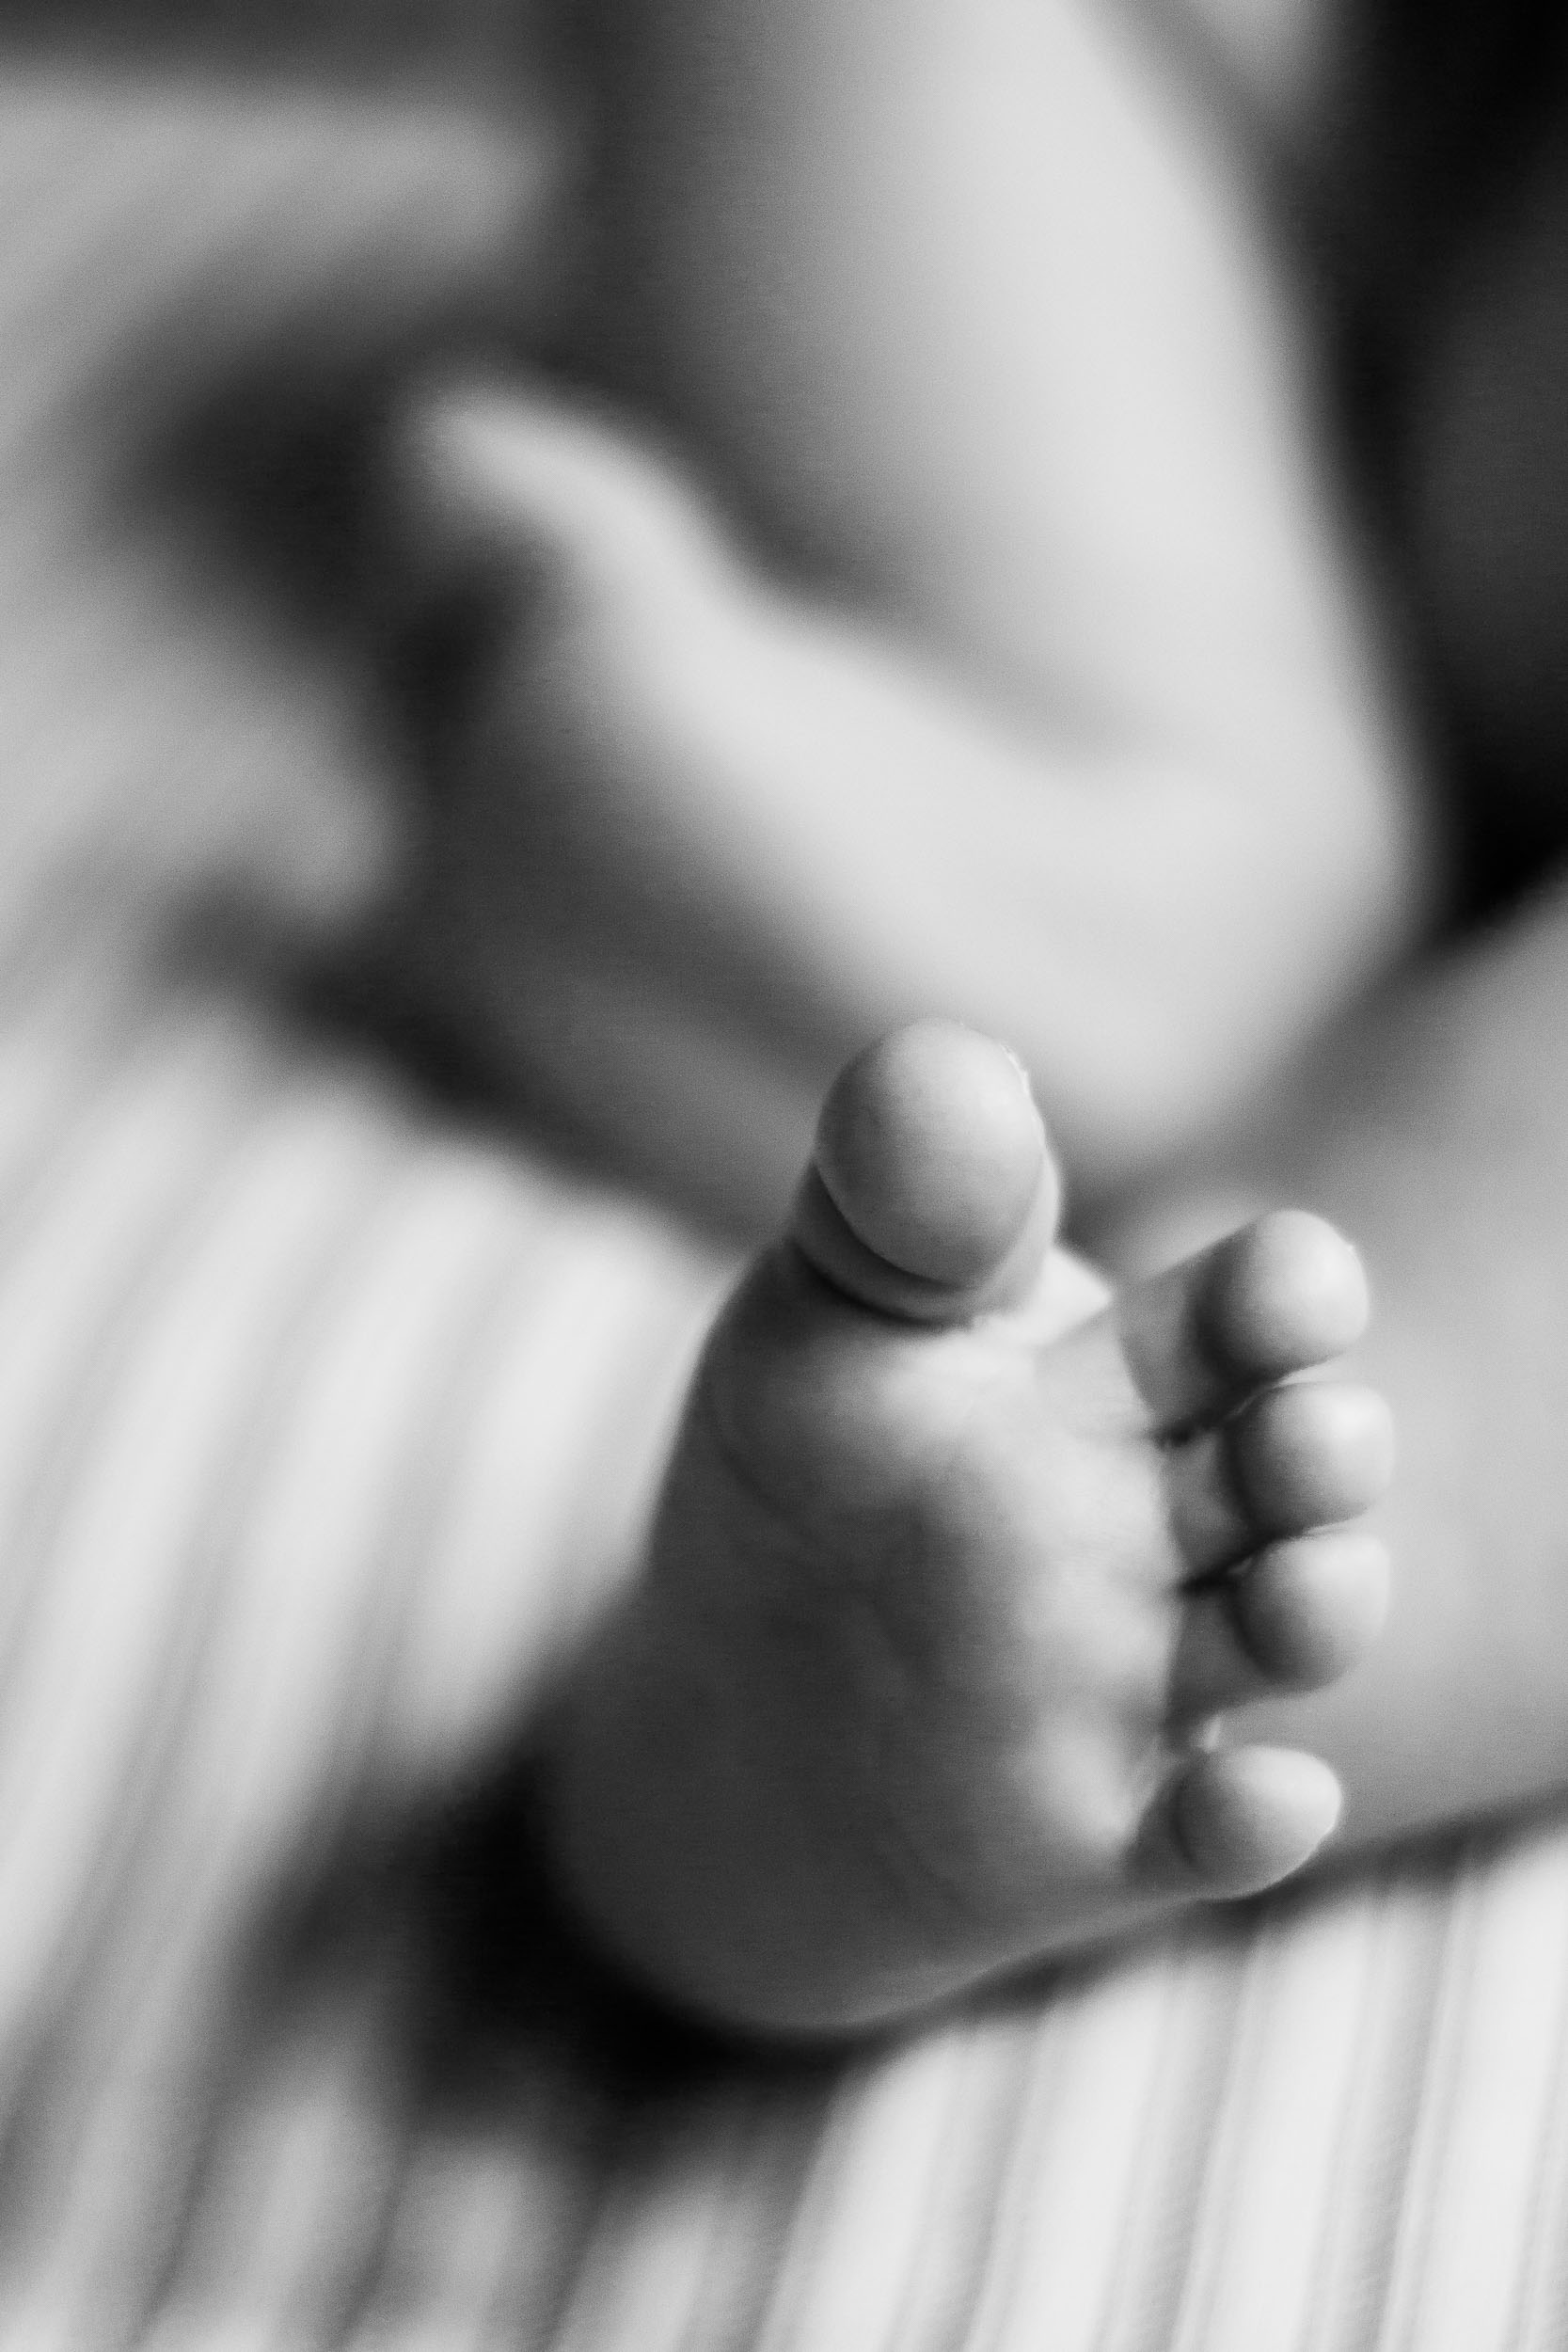 Seattle Newborn Photographer | By G. Lin Photography | Baby toes close up in black and white